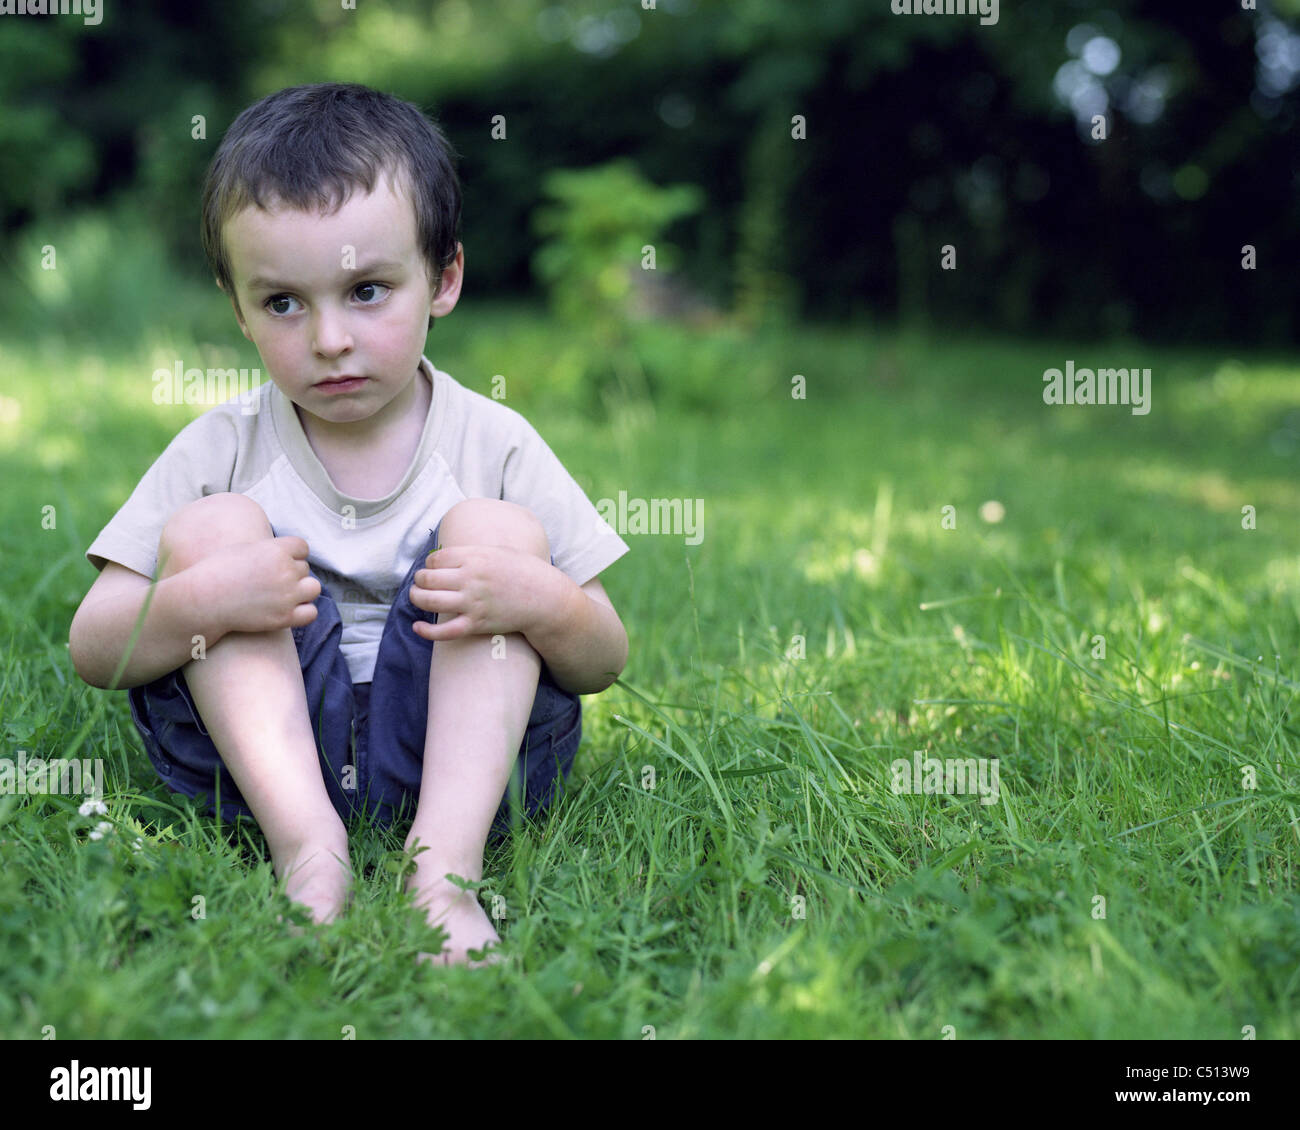 Little boy sitting in grass, looking away in thought Stock Photo